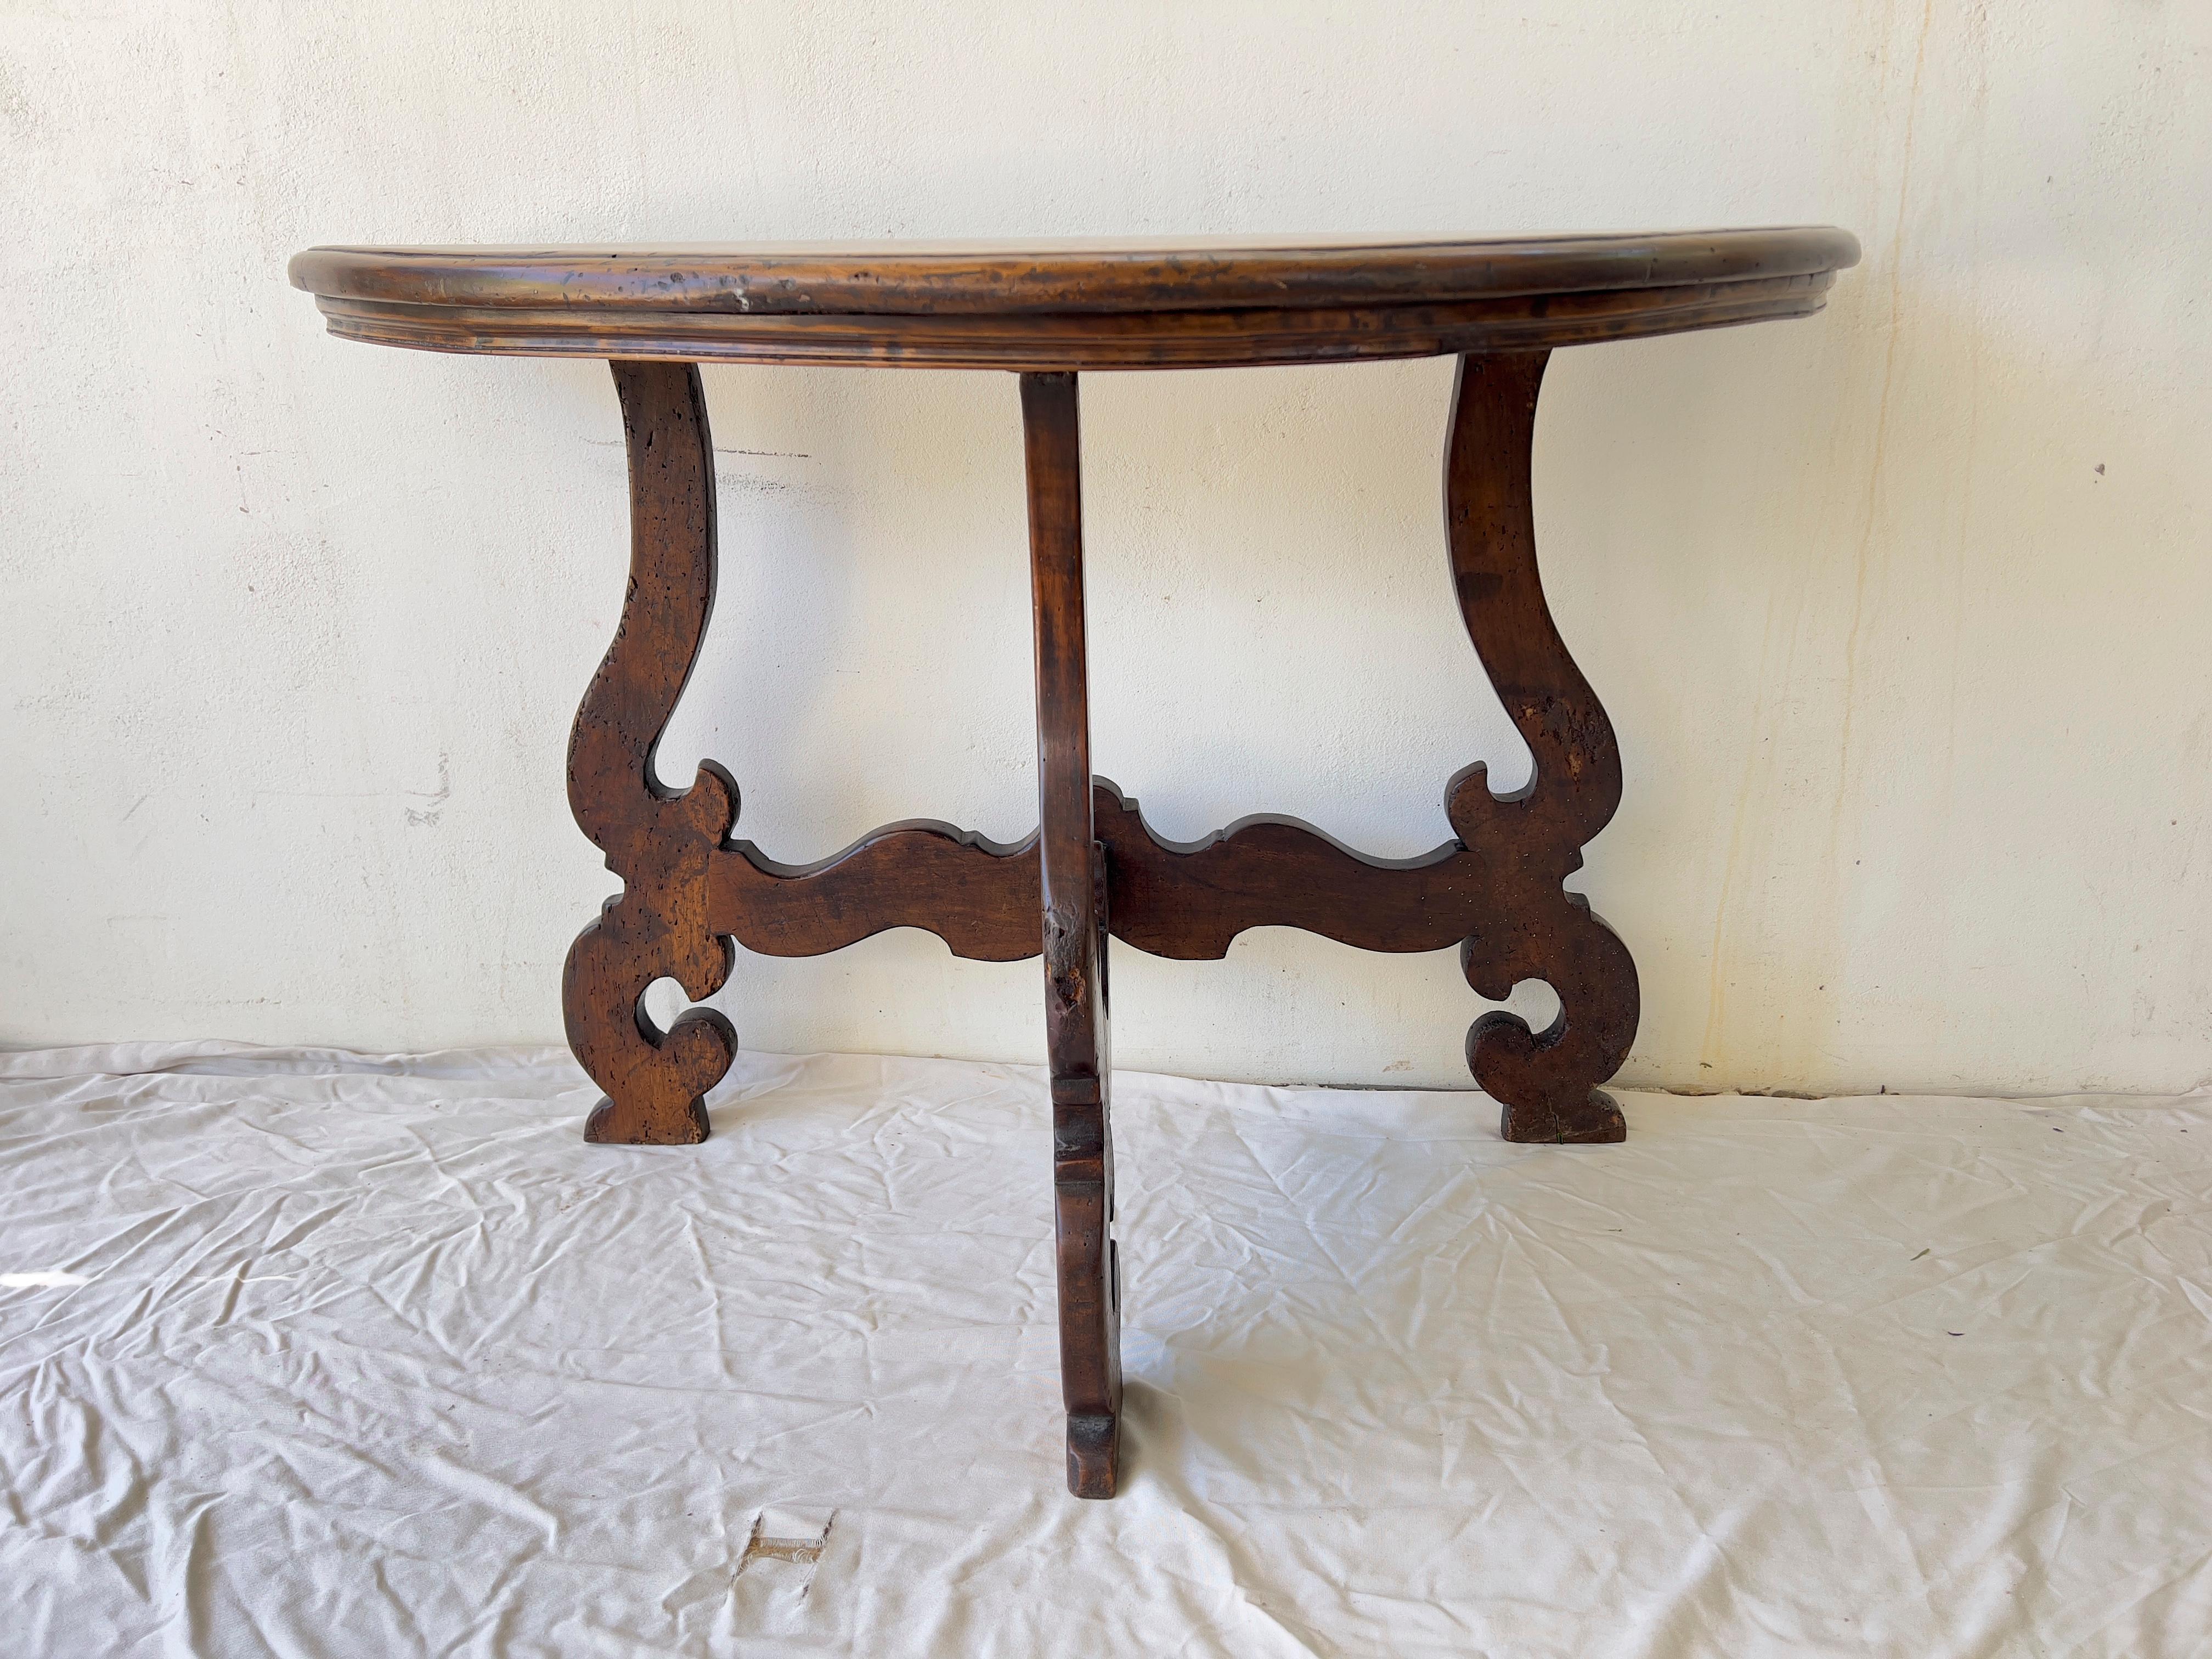  Italian Baroque style  walnut demi lune console table from the 18th century, with semi-circular top, carved legs and cross stretcher.  this Baroque table or  console is in excellent condition  with a wonderful grain, The half-moon rounded tops have